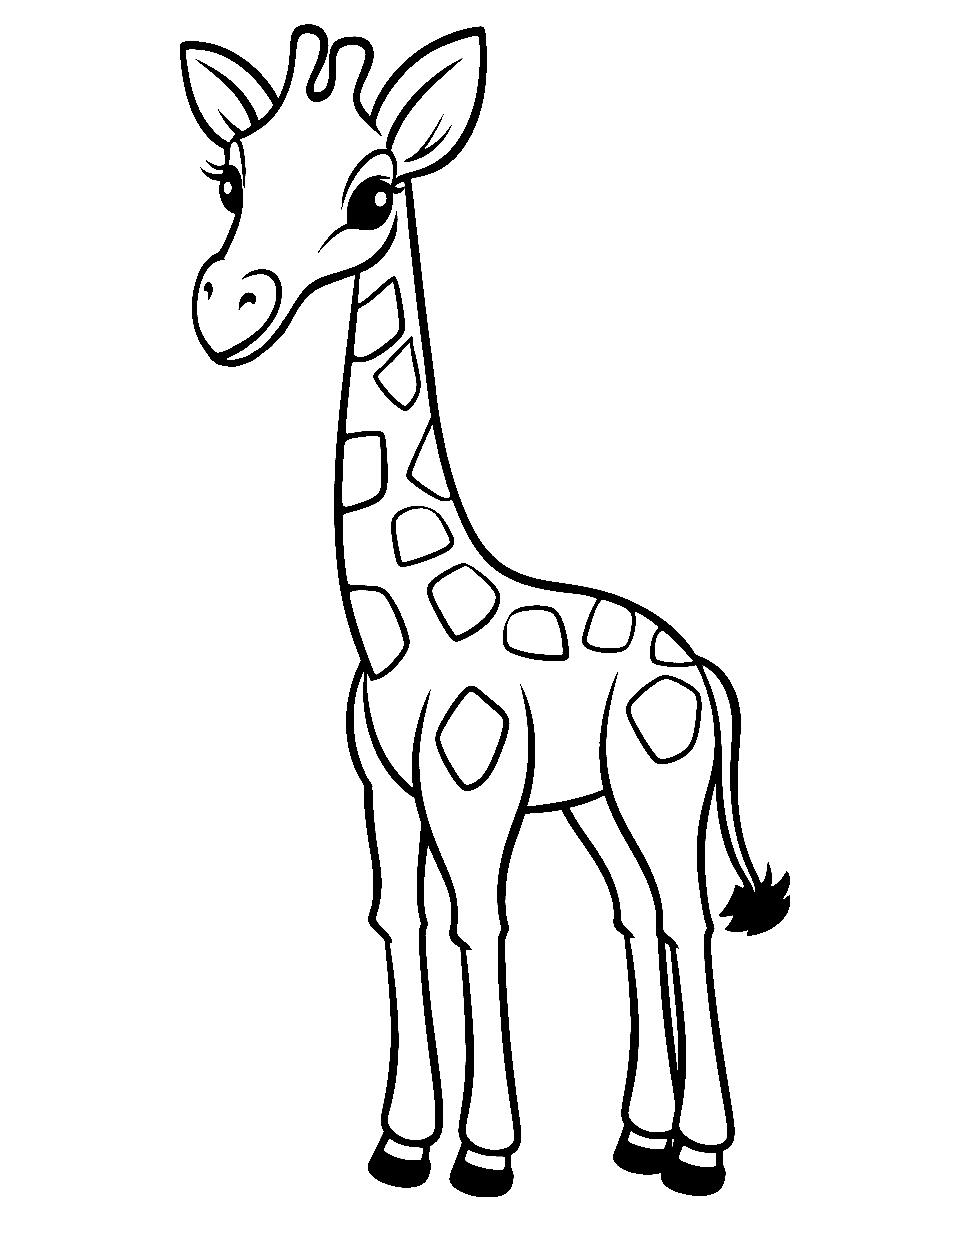 Easy Giraffe Outline Coloring Page - A basic outline of a giraffe for beginners.